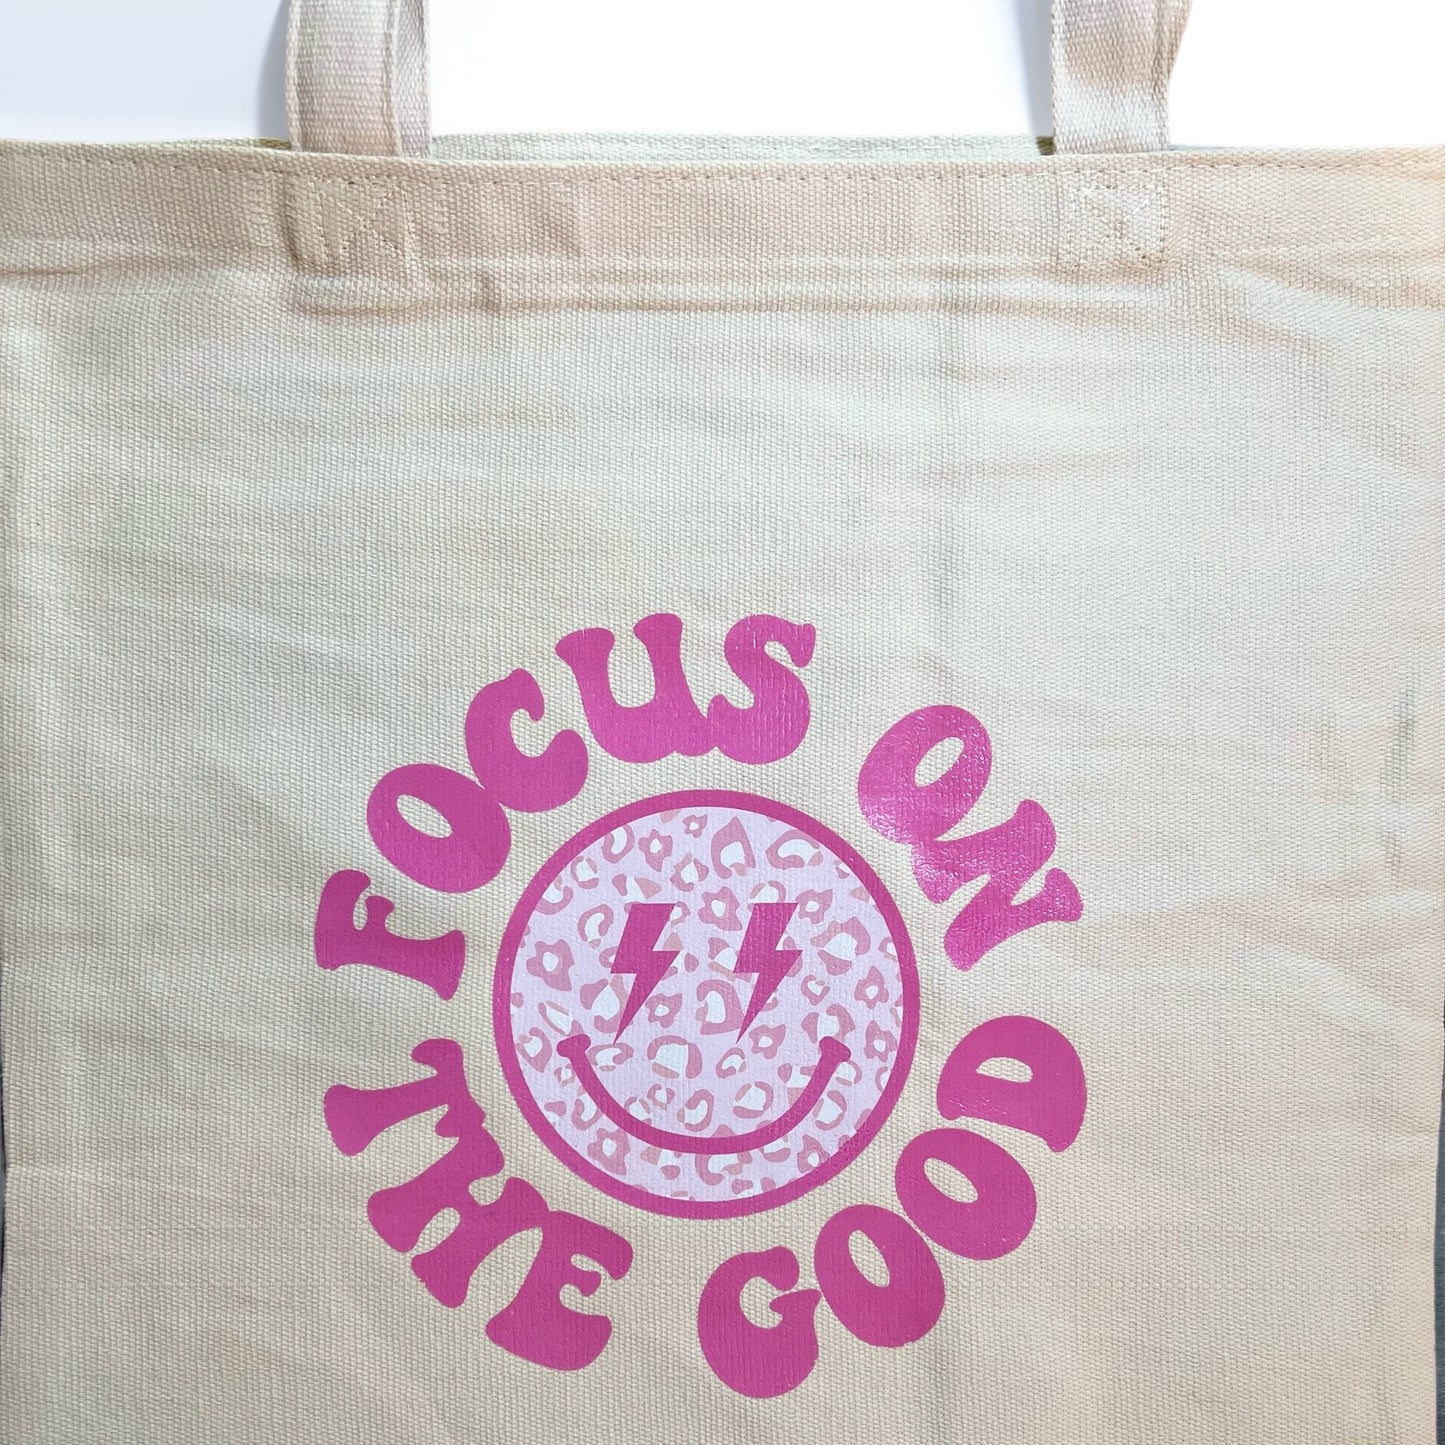 Focus on the Good Tote